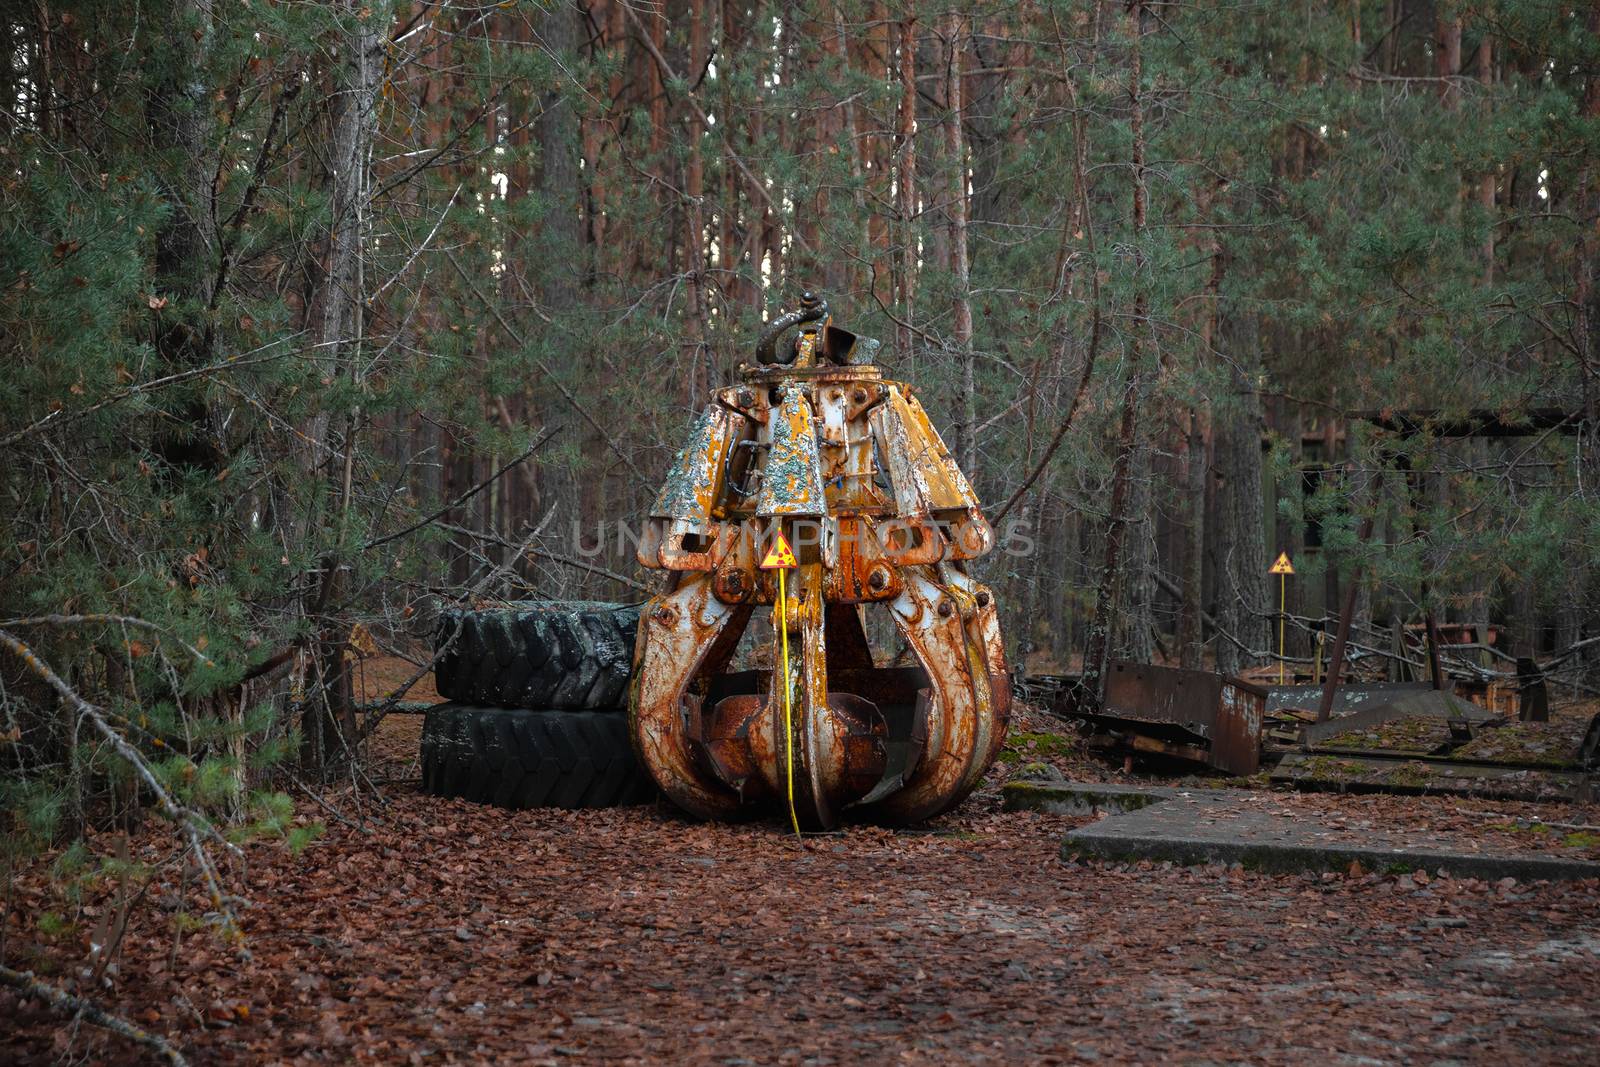 The highly contaminated Claw, machine part in Chernobyl Exclusion Zone, 2019 by svedoliver